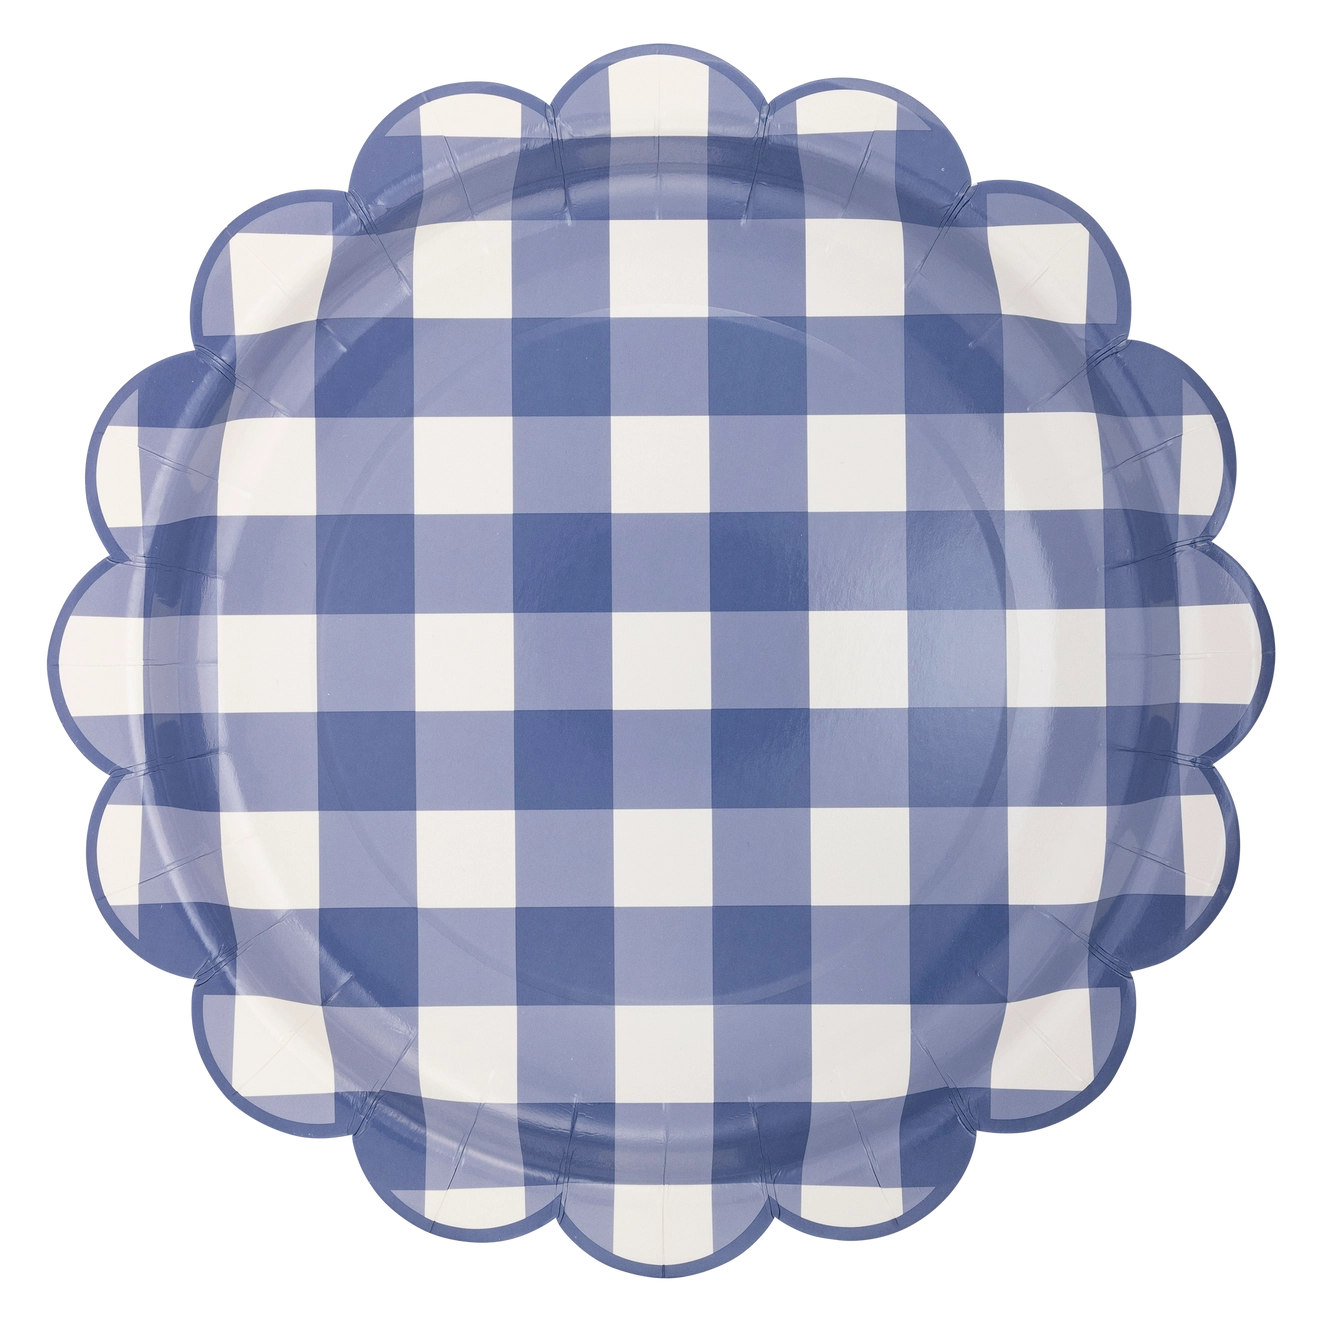 Blue Gingham Scalloped Paper Plate